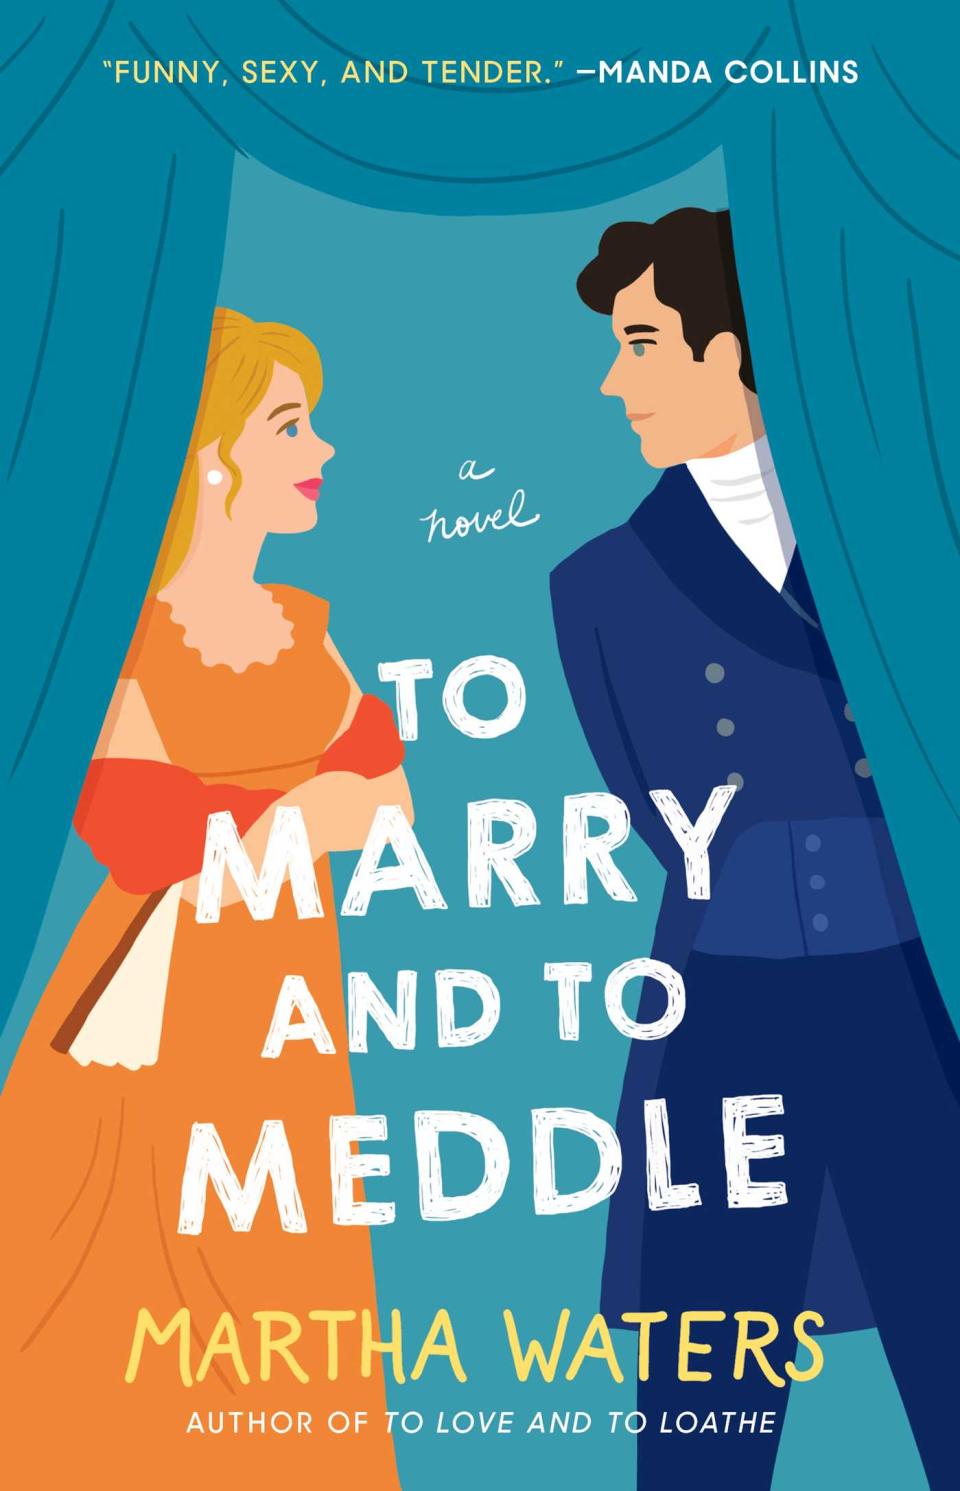 "To Marry and to Meddle," by Martha Waters